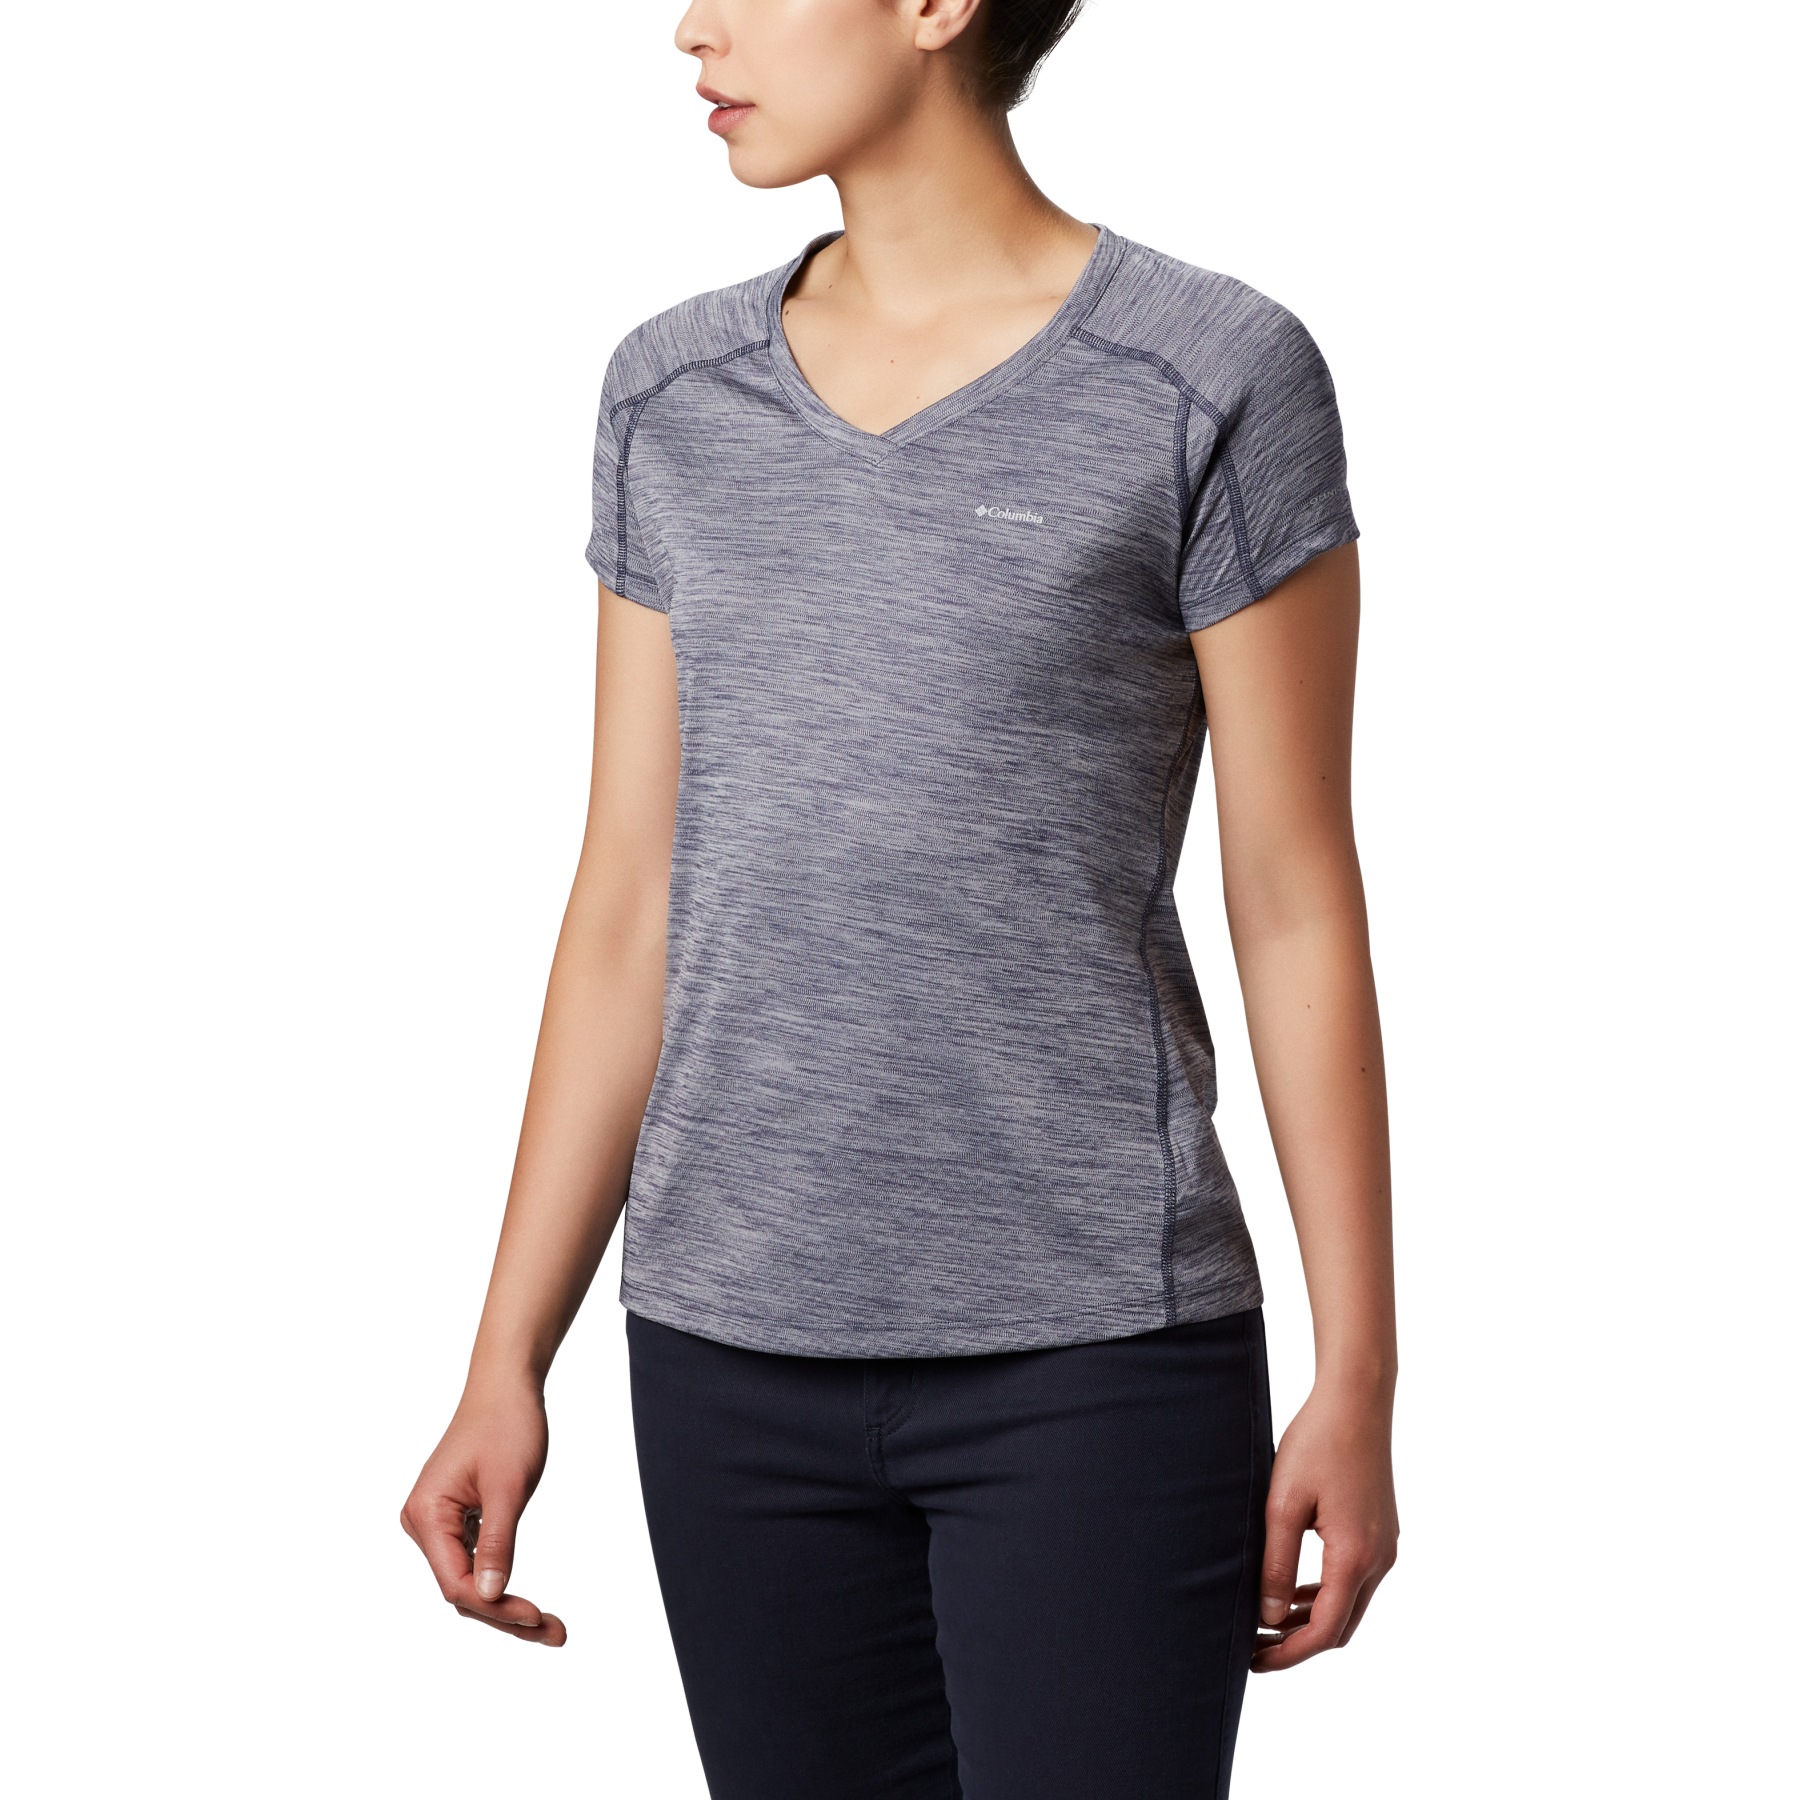 Image of Columbia Zero Rules T-Shirt Women - Nocturnal Heather